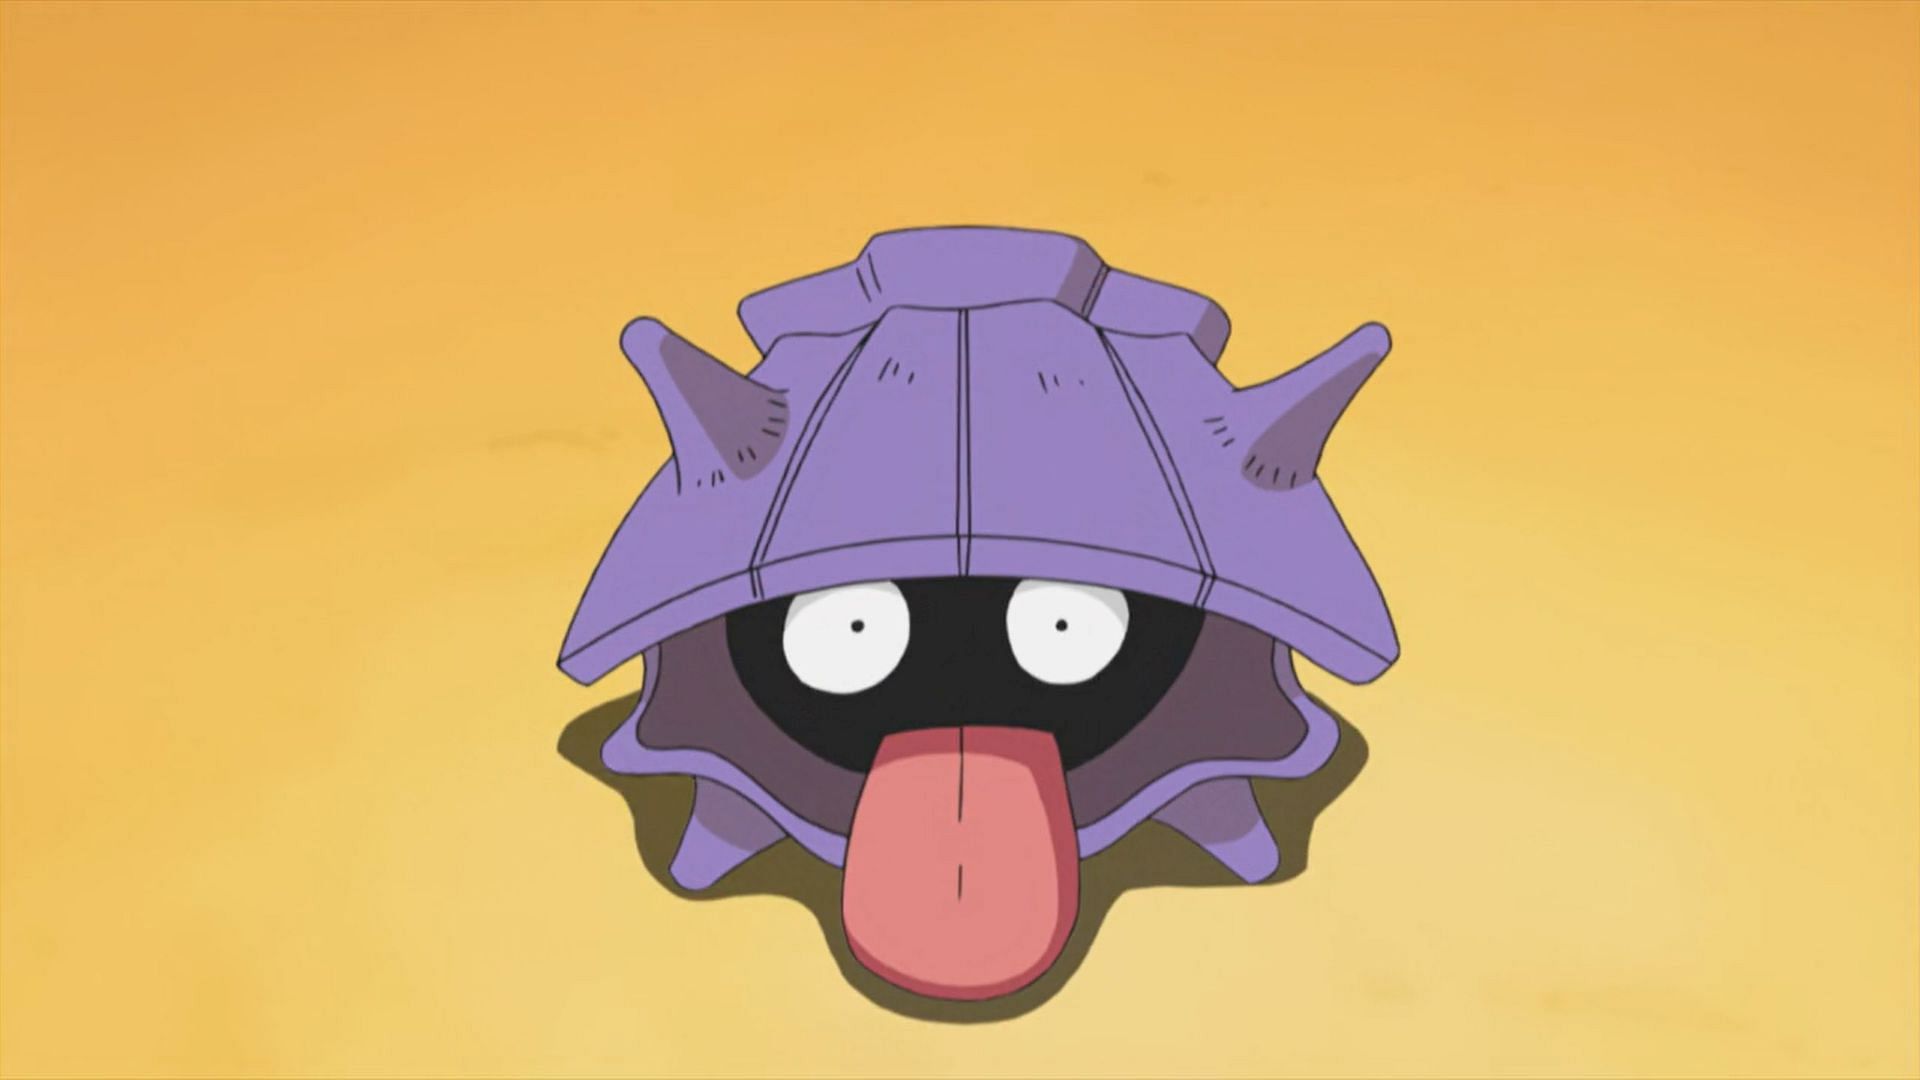 Shellder was the Pokedle Classic answer for March 27, 2024 (Image via The Pokemon Company)